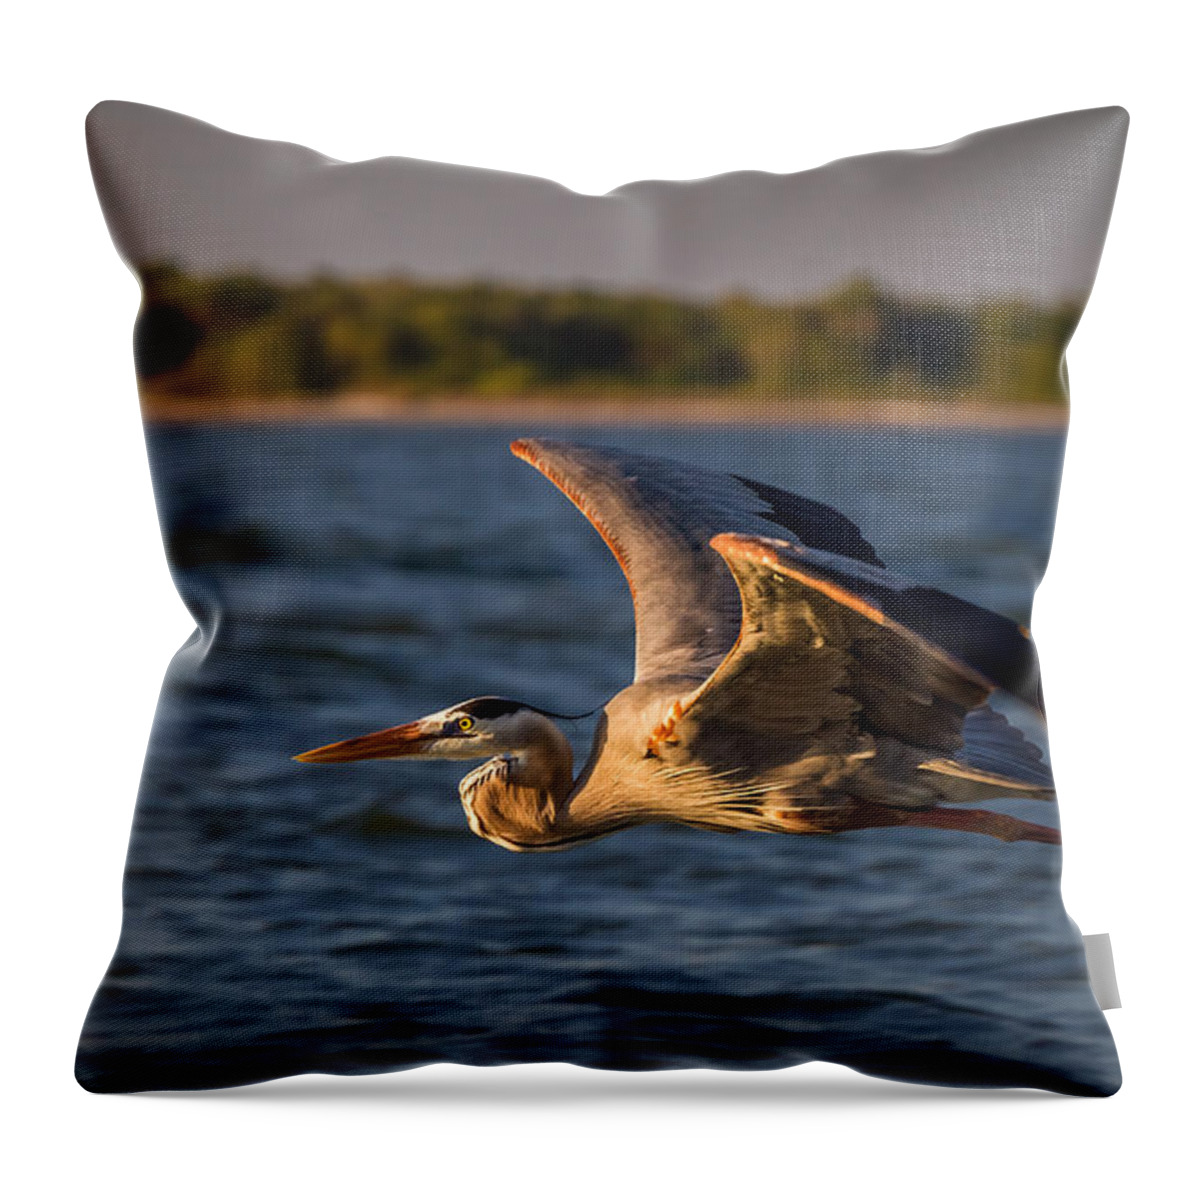 Big Bird Throw Pillow featuring the photograph Flying Great Blue Heron by Ron Pate